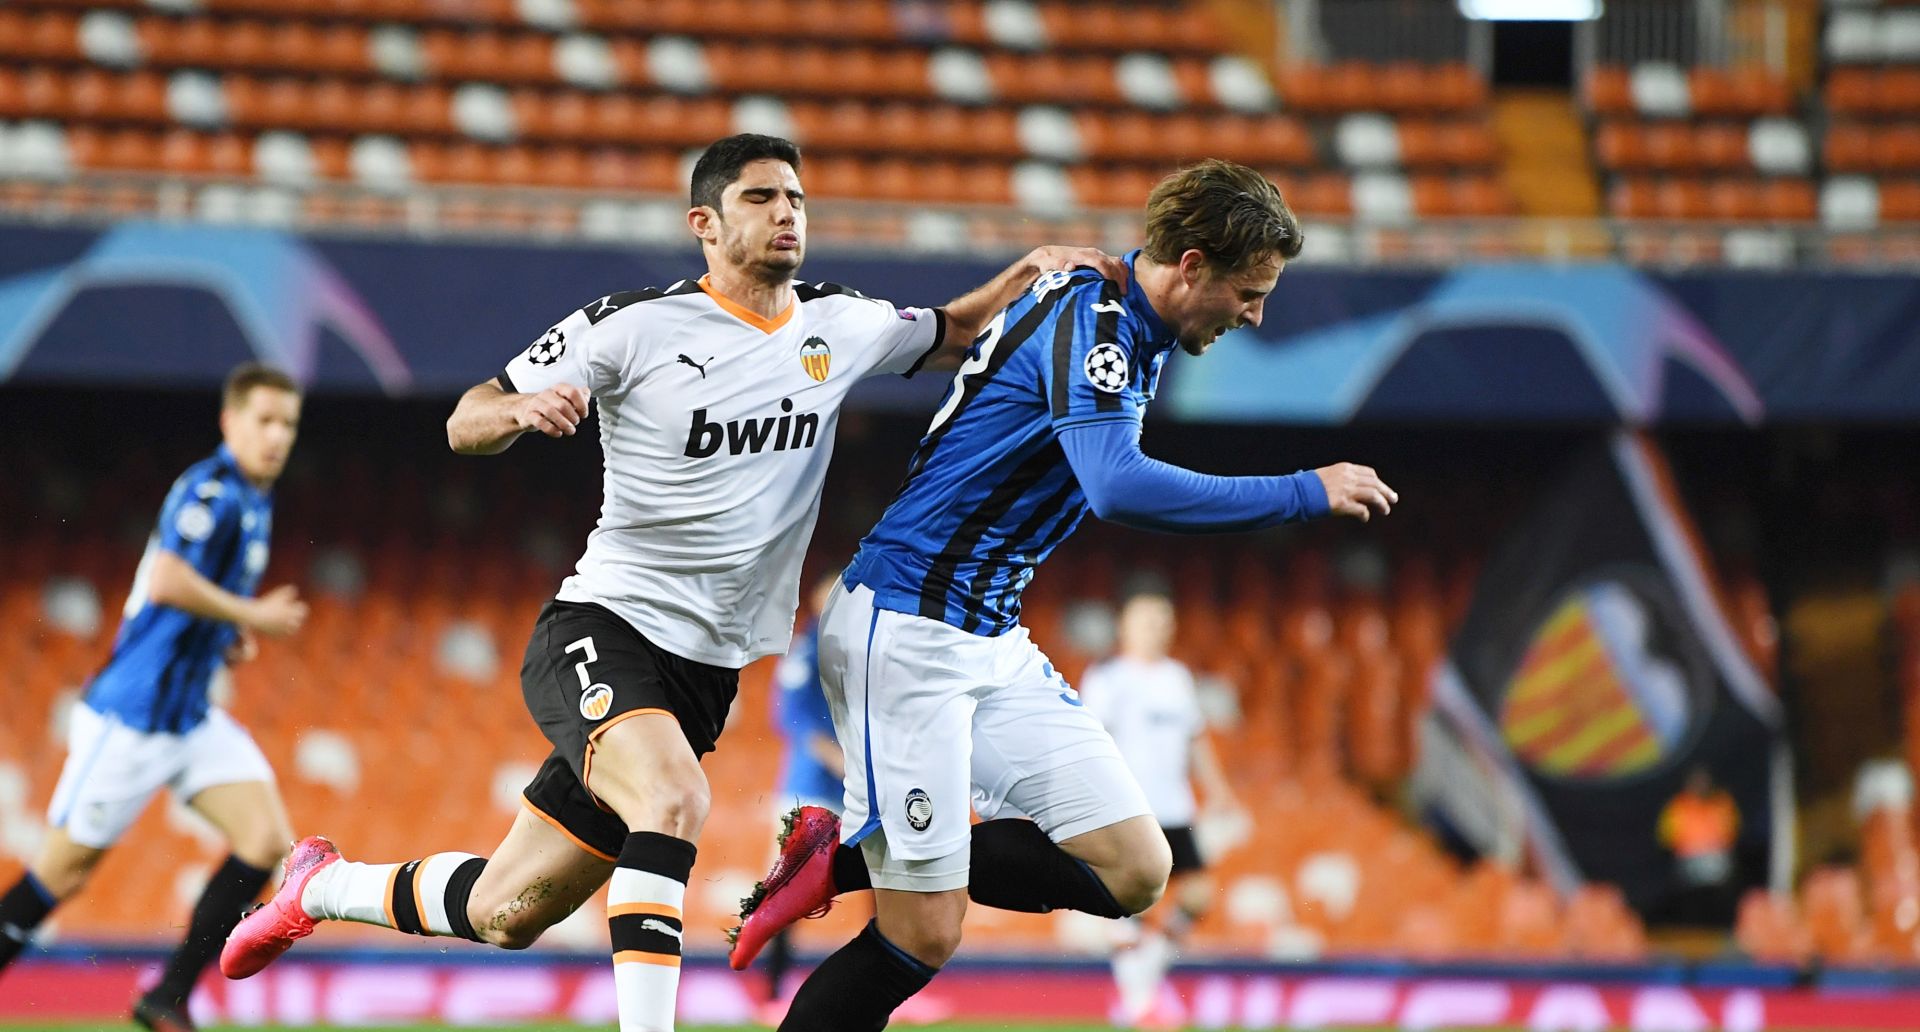 epa08284653 A handout image provided by UEFA shows Goncalo Guedes (L) of Valencia tackling Hans Hateboer (R) of Atalanta during the UEFA Champions League round of 16 second leg match between Valencia CF and Atalanta BC at Estadio Mestalla in Valencia, Spain, 10 March 2020. The match takes place behind closed doors due to the coronavirus (COVID-19) outbreak.  EPA/UEFA / HO **SHUTTERSTOCK OUT** HANDOUT NO SALES/NO ARCHIVES